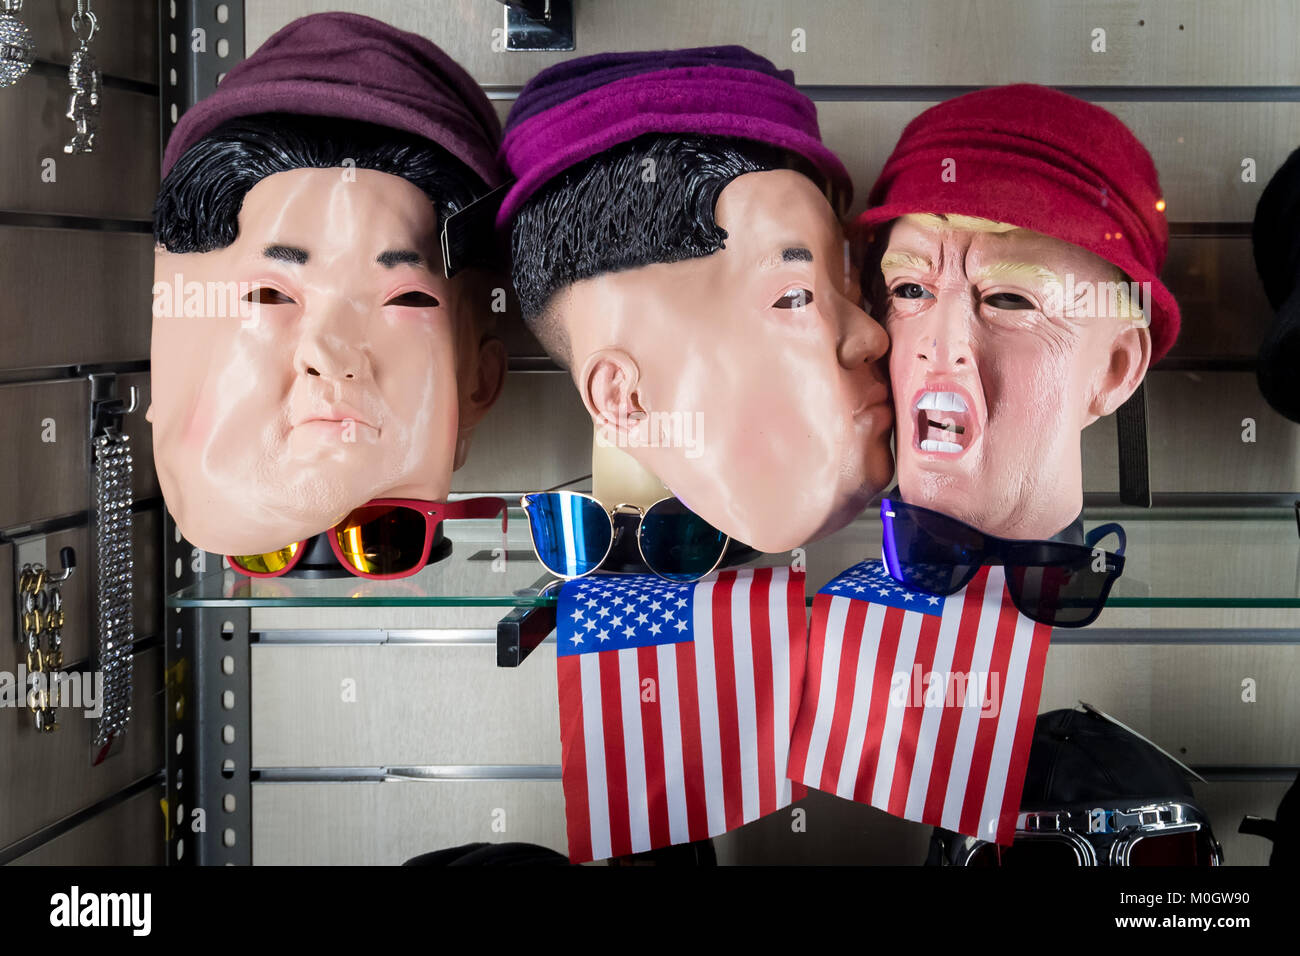 London, UK. 22nd Jan, 2018. Kim Jong-un and Donald Trump face masks are arranged provocatively in a London shop window. Credit: Guy Corbishley/Alamy Live News Stock Photo